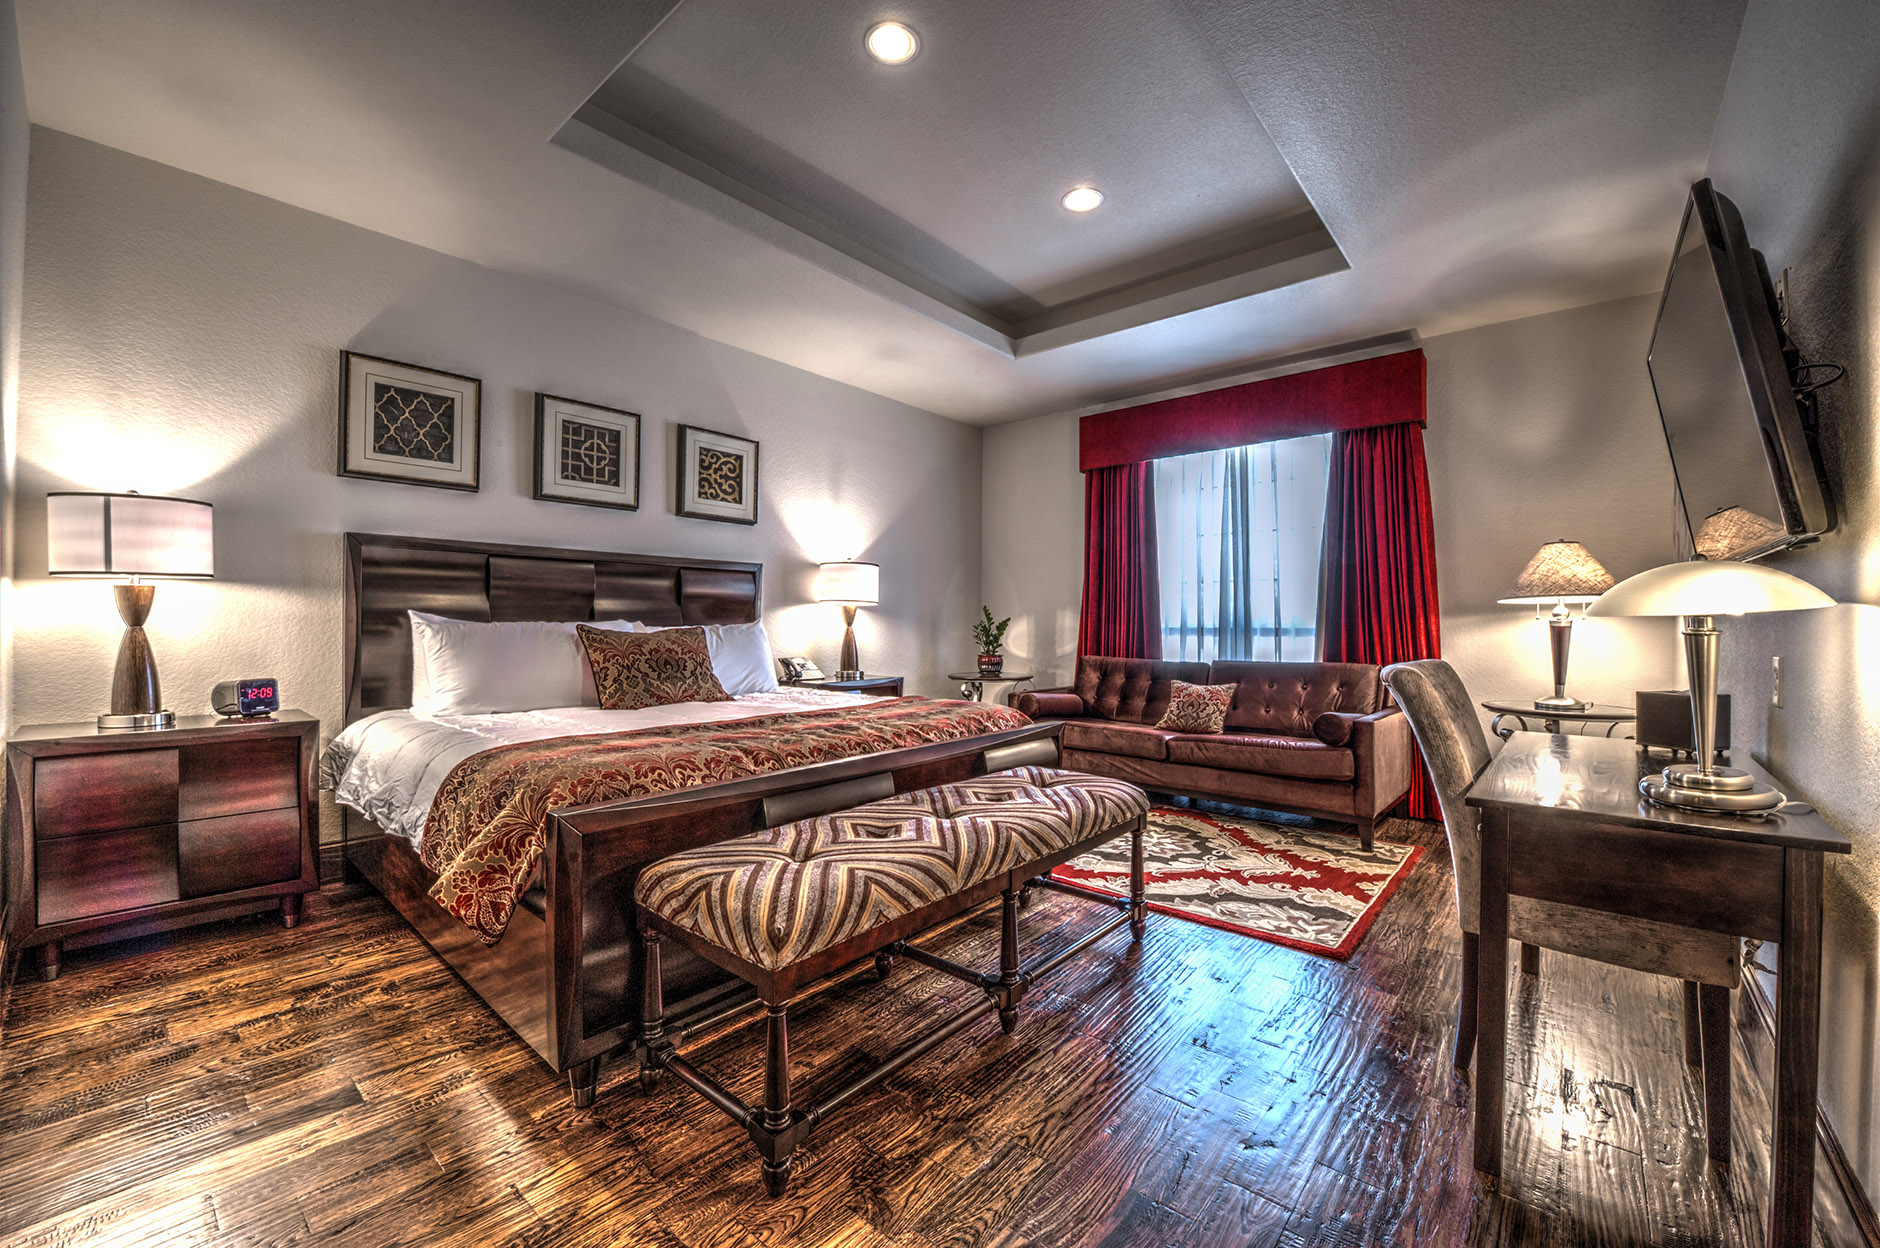 Luxury King Hotel Suite at the Sundance Club, Dallas-Fort Worth, Texas